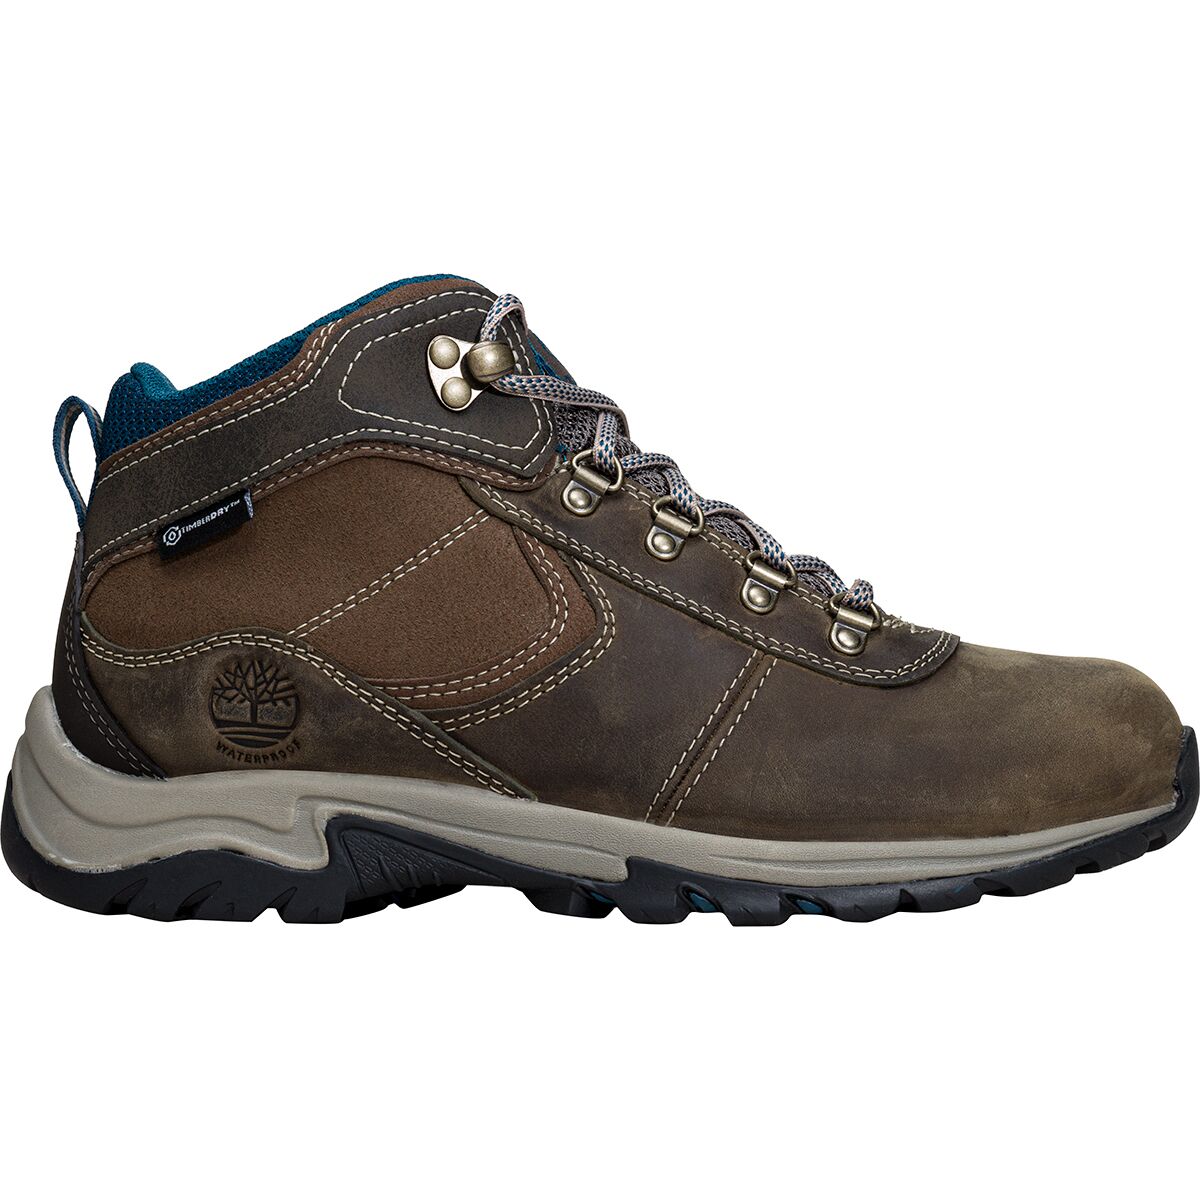 Mt. Maddsen Mid Leather Waterproof Hiking Boot - Women